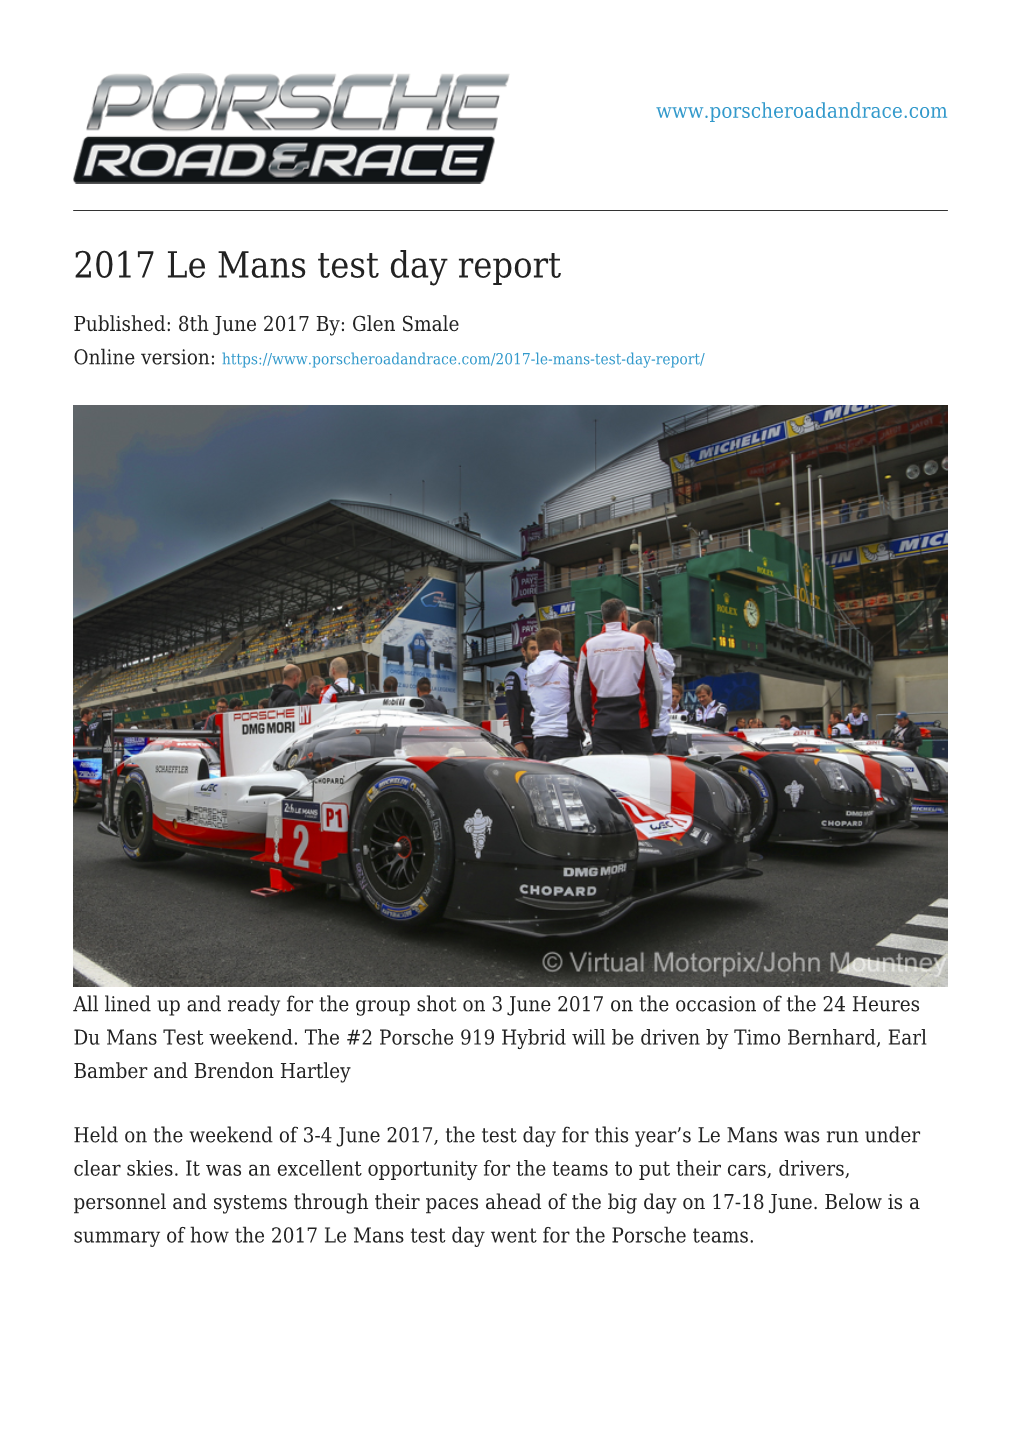 2017 Le Mans Test Day Report